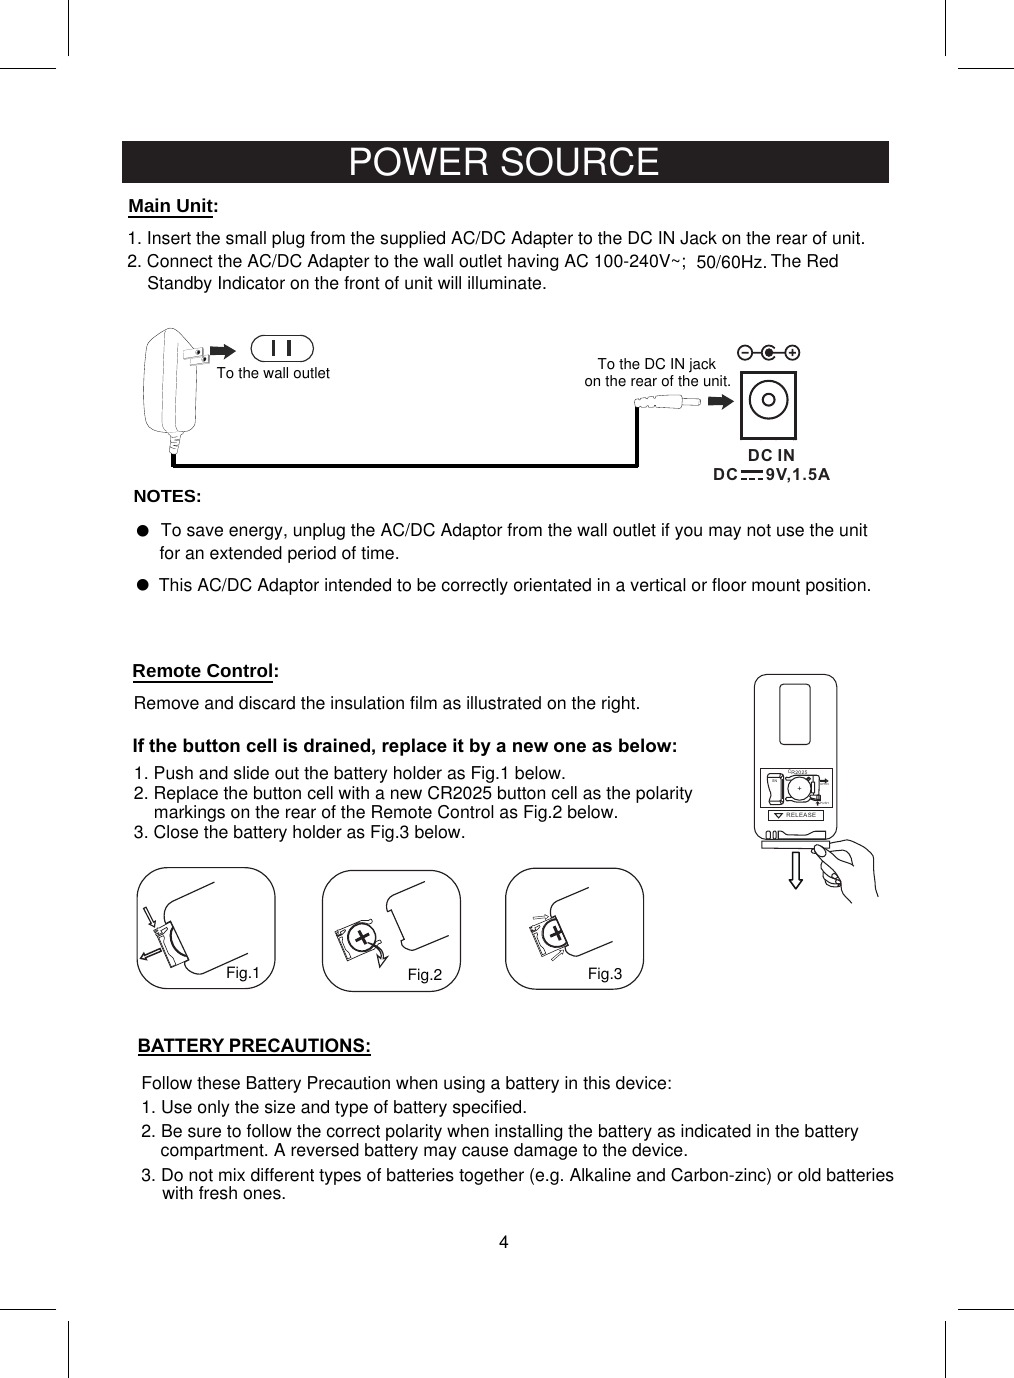 NOTES:1. Insert the small plug from the supplied AC/DC Adapter to the DC IN Jack on the rear of unit.2. Connect the AC/DC Adapter to the wall outlet having AC 100-240V~;  50/60Hz.To the wall outletThis AC/DC Adaptor intended to be correctly orientated in a vertical or floor mount position.To save energy, unplug the AC/DC Adaptor from the wall outlet if you may not use the unit for an extended period of time.    4POWER SOURCEThe Red Standby Indicator on the front of unit will illuminate.DC INDC      9V,1.5ATo the DC IN jack on the rear of the unit.Remove and discard the insulation film as illustrated on the right.RELE ASEPUSHOPENR2025C+SNFig.1 Fig.2 Fig.3If the button cell is drained, replace it by a new one as below:1. Push and slide out the battery holder as Fig.1 below.2. Replace the button cell with a new CR2025 button cell as the polaritymarkings on the rear of the Remote Control as Fig.2 below.3. Close the battery holder as Fig.3 below.Follow these Battery Precaution when using a battery in this device:1. Use only the size and type of battery specified.BATTERY PRECAUTIONS:2. Be sure to follow the correct polarity when installing the battery as indicated in the battery compartment. A reversed battery may cause damage to the device.3. Do not mix different types of batteries together (e.g. Alkaline and Carbon-zinc) or old batteries with fresh ones.Main  Unit:Remote  Control: